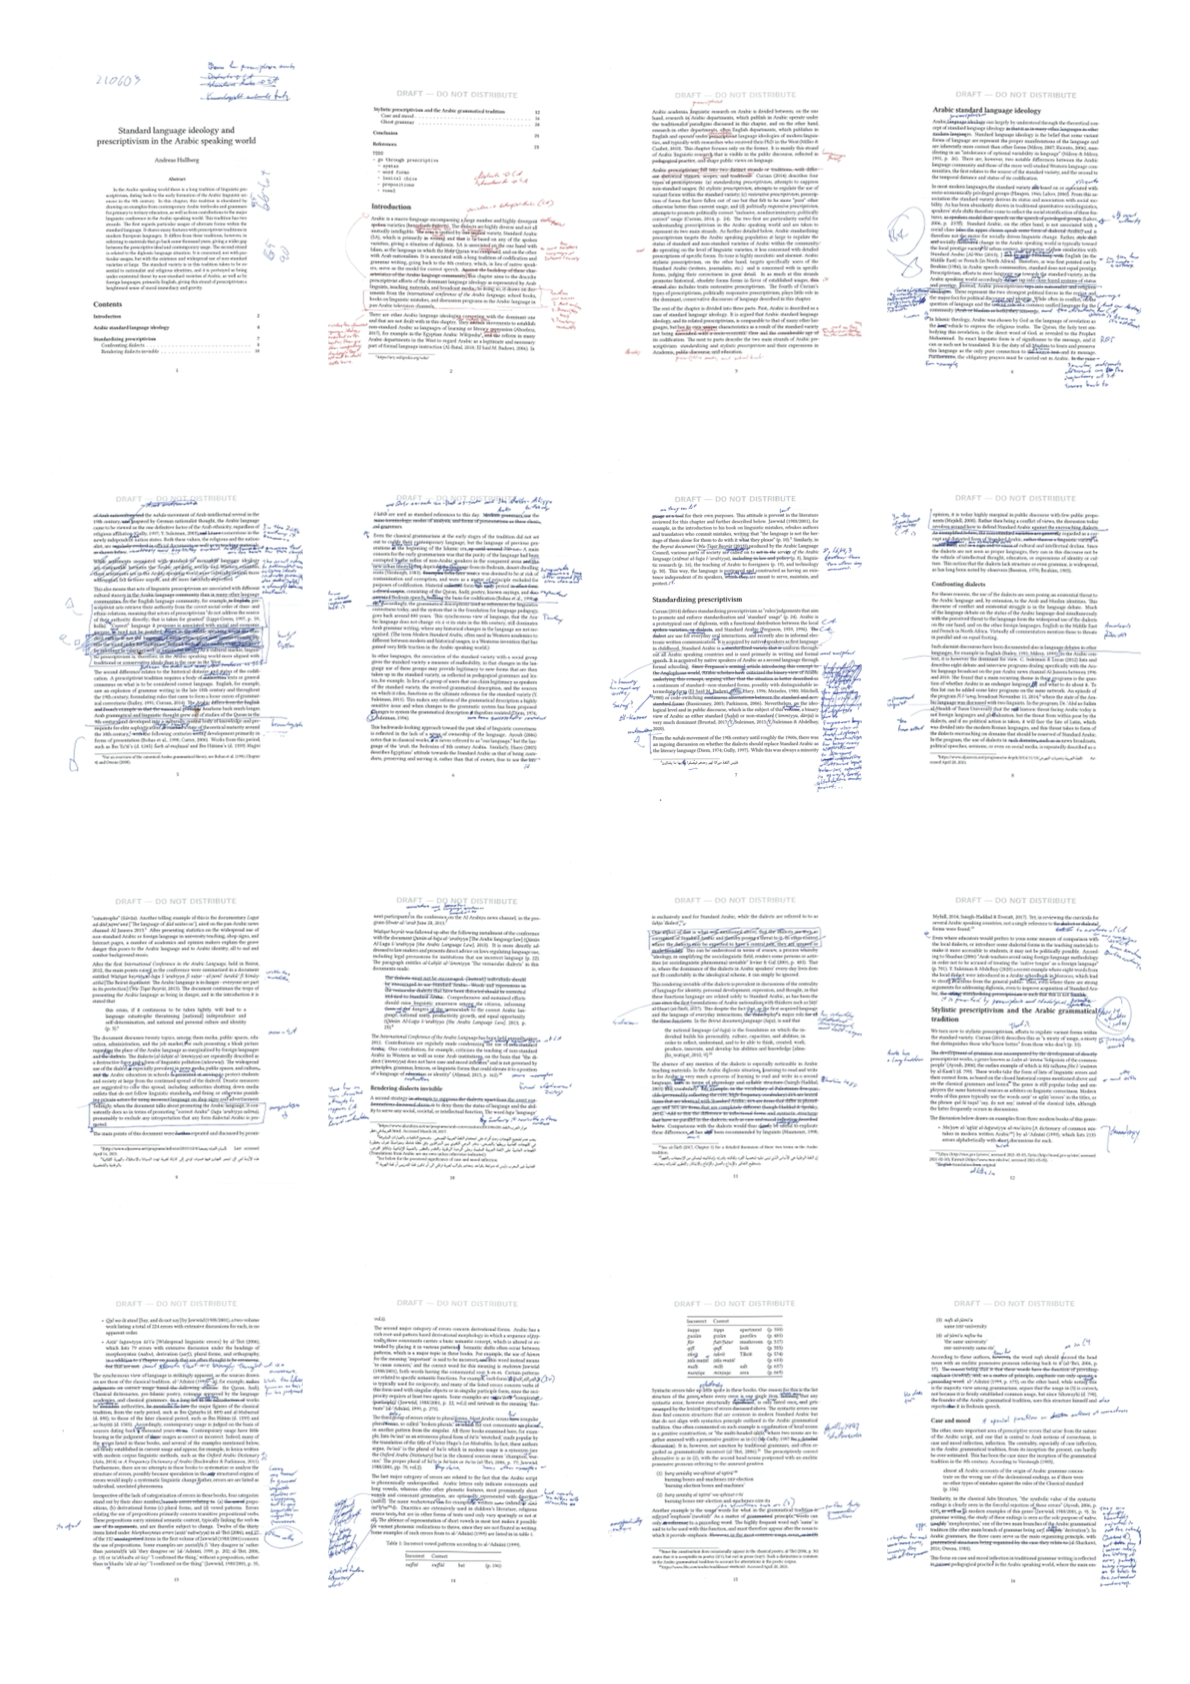 Sixteen pages of editing